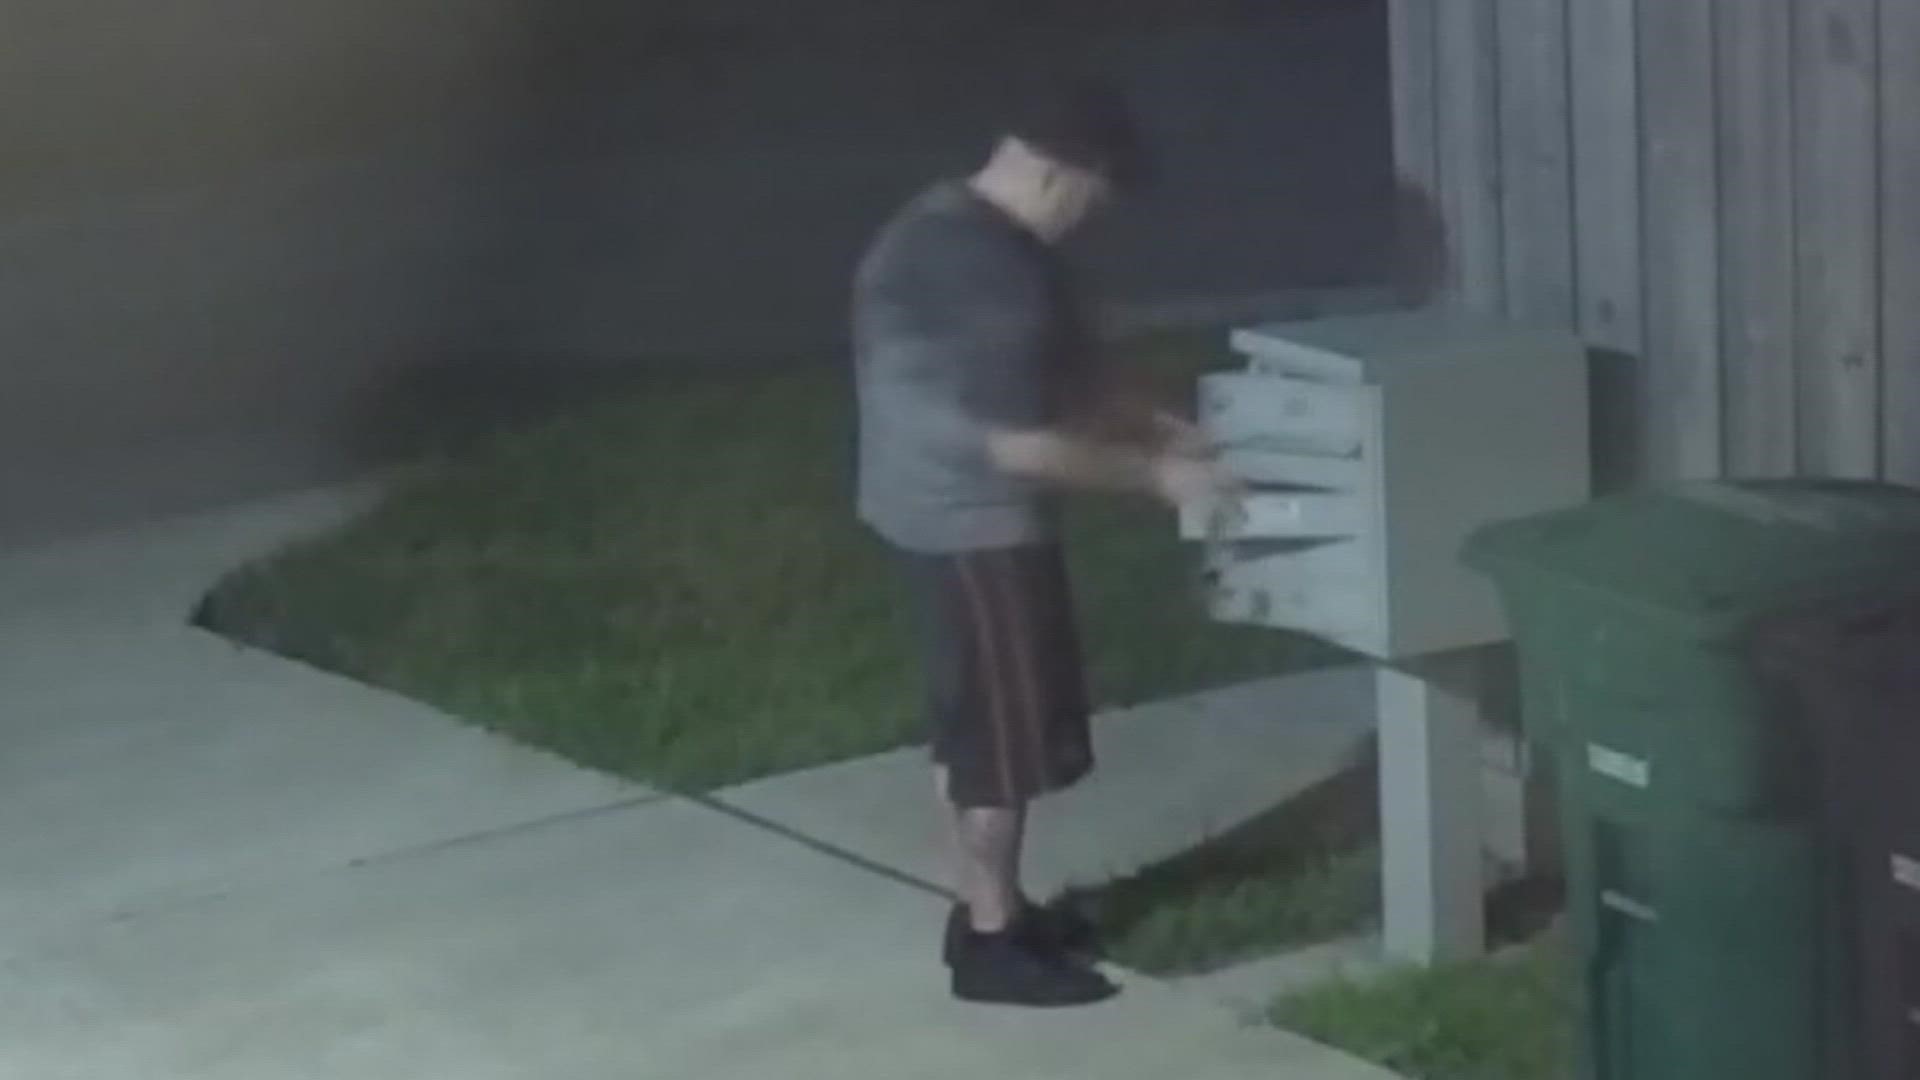 Thieves targeting community mailboxes are becoming a huge problem in the Houston area. The USPIS offers tips on how to prevent yourself from becoming a victim.